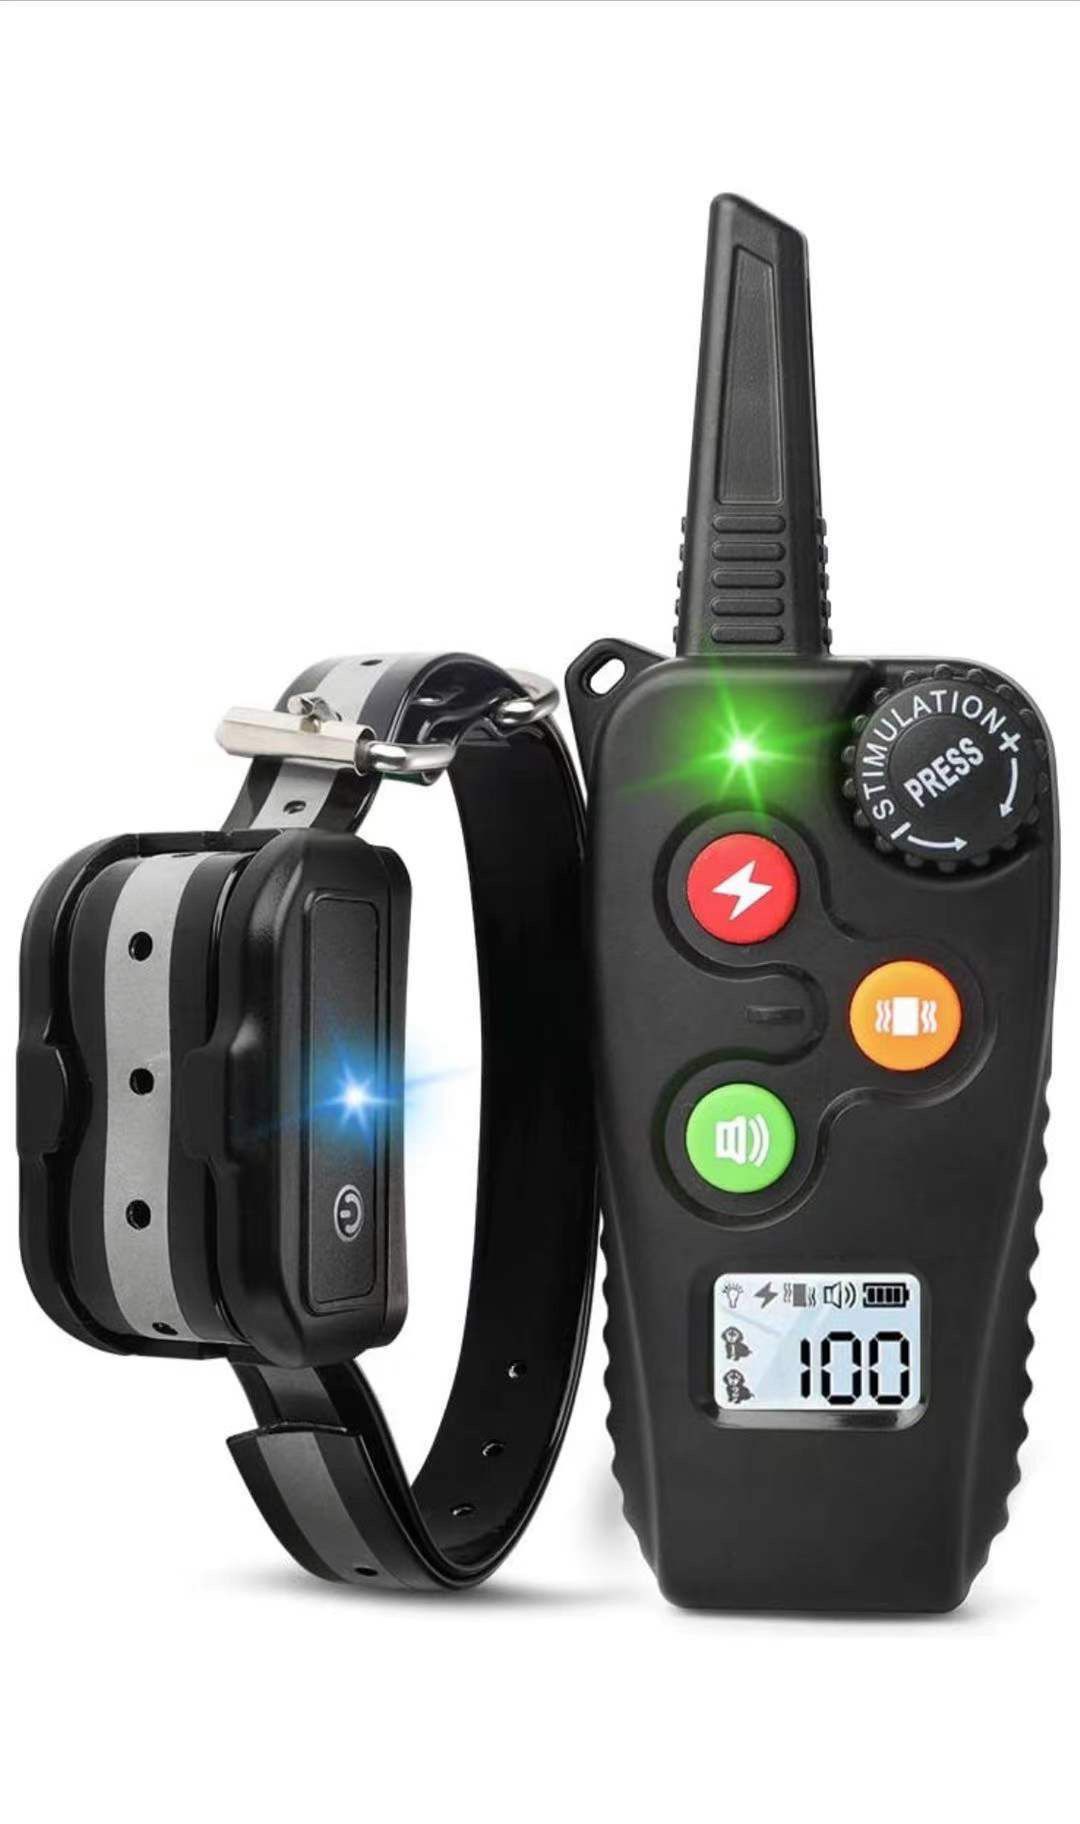 Dog Training Collar, Shock Collar for Dogs with Remote Range Up to 3,300ft Rechargeable and Vibration, Beep, Shock and Night Light Modes for Small Med